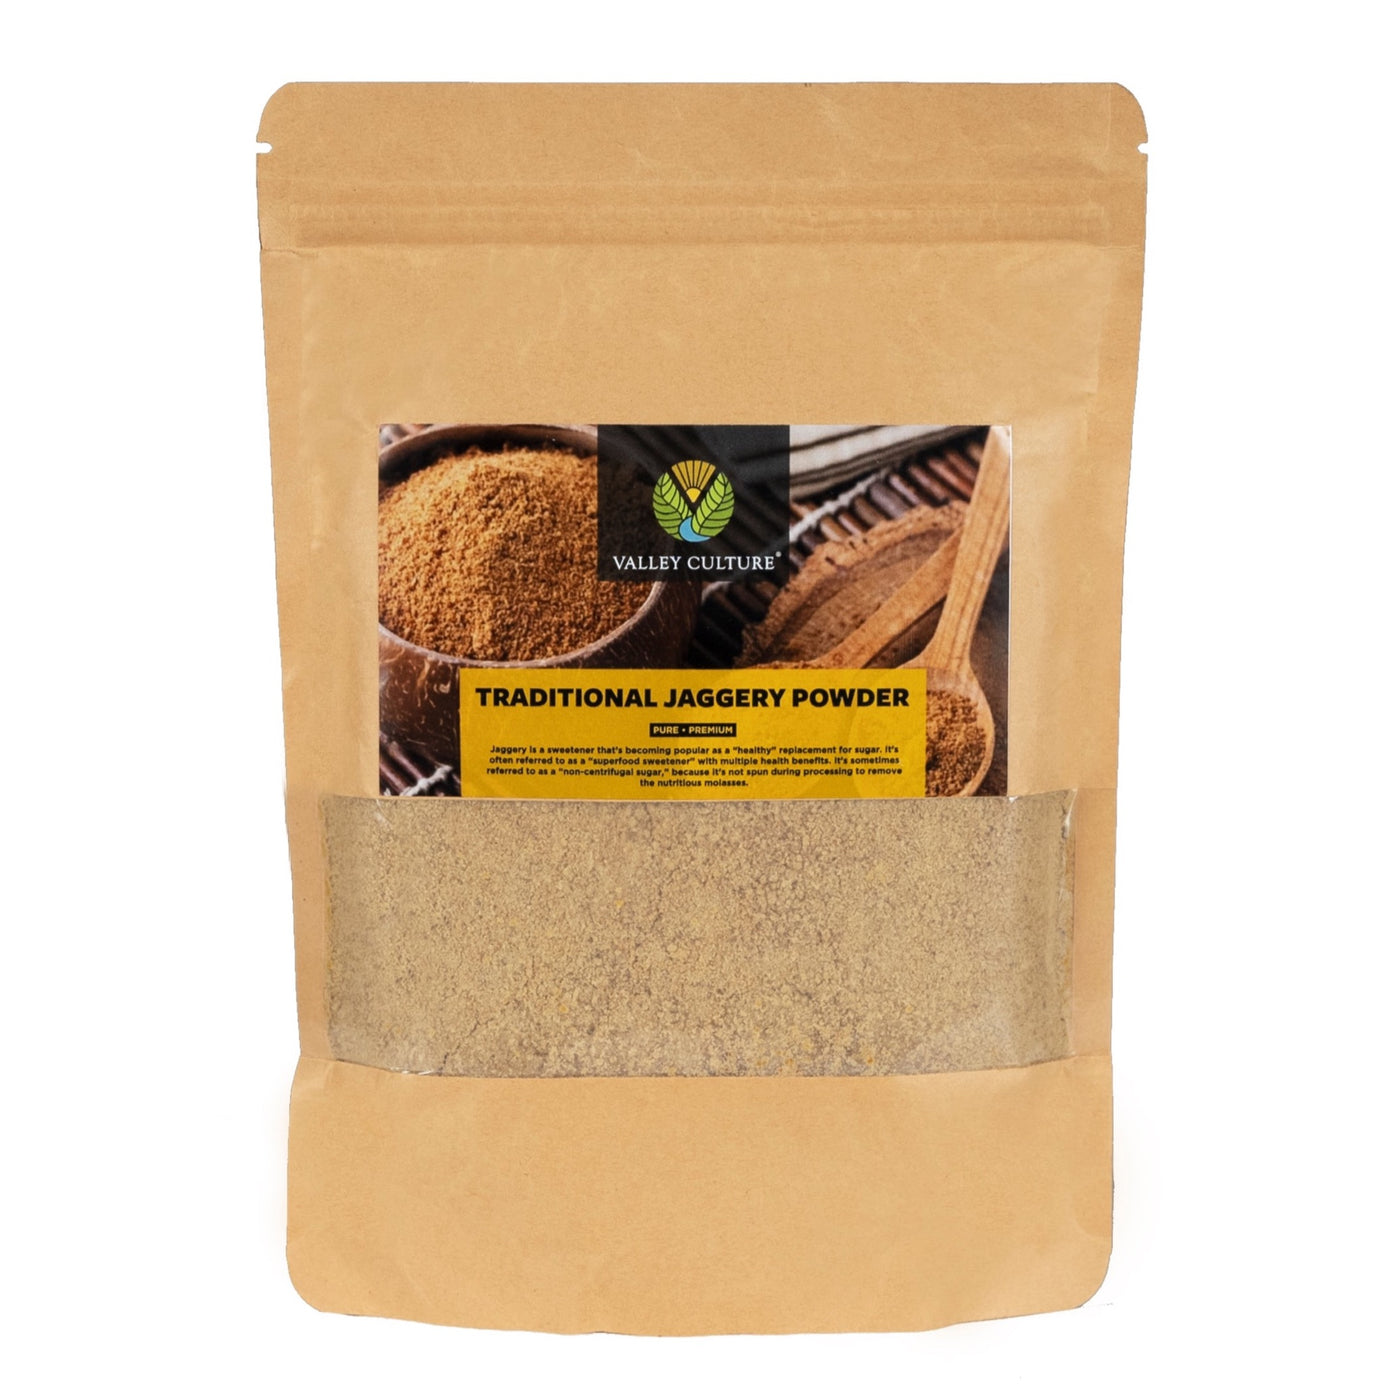 Valley Culture's Jaggery Powder